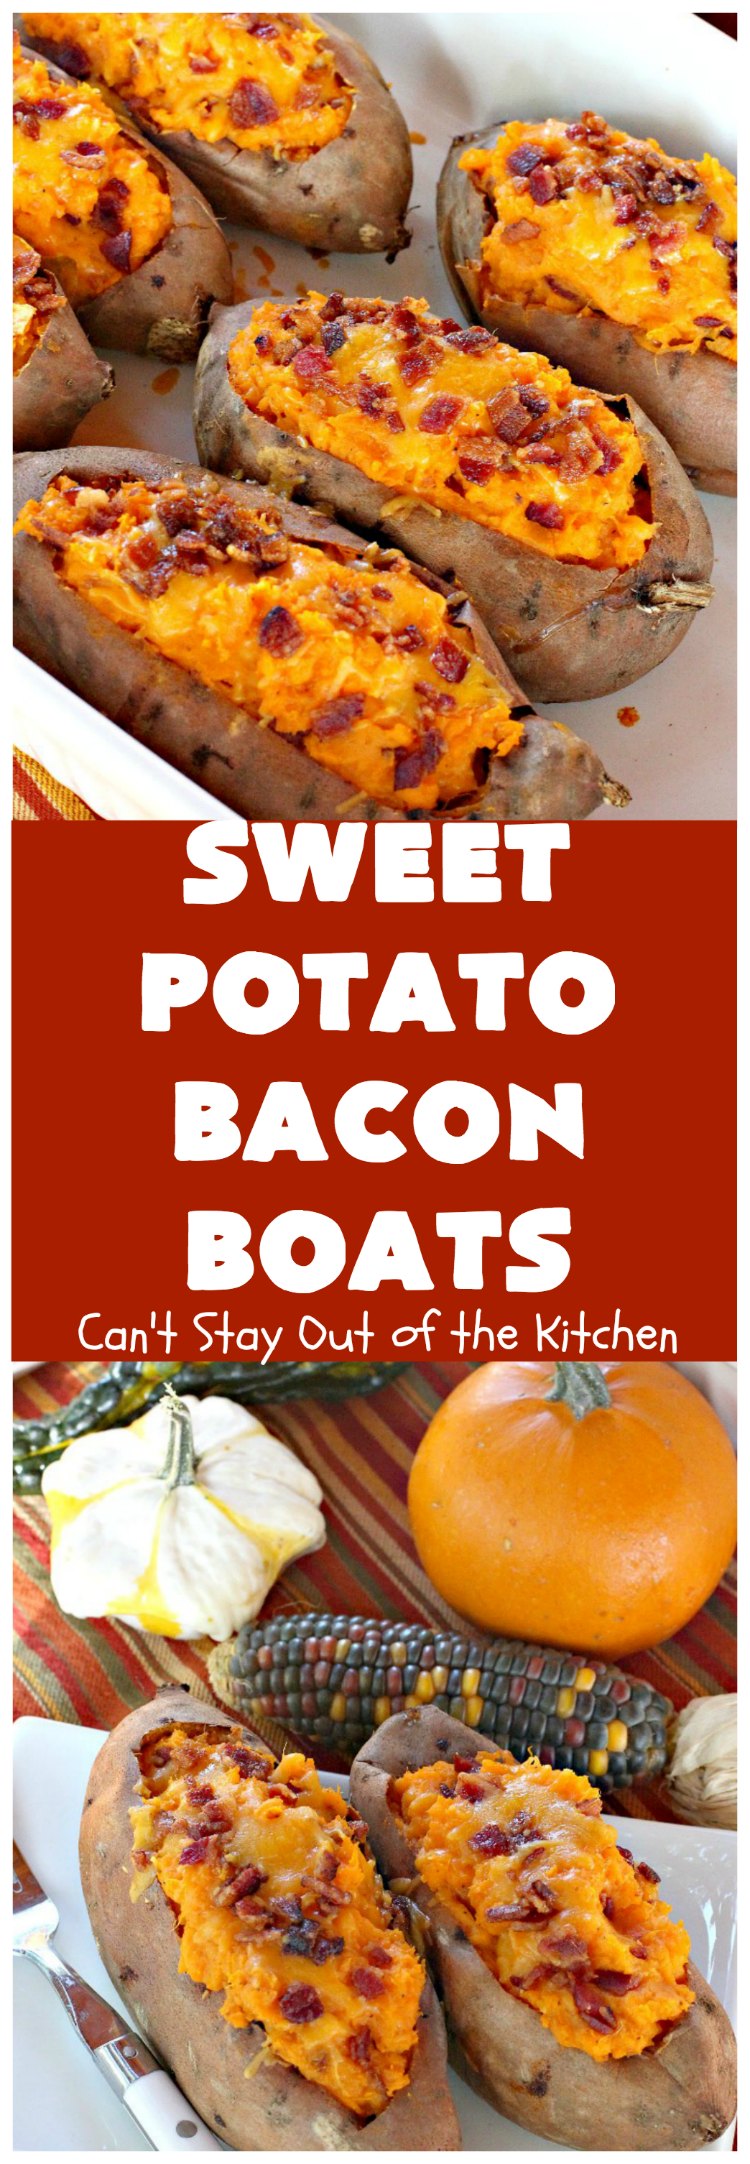 Sweet Potato Bacon Boats | Can't Stay Out of the Kitchen